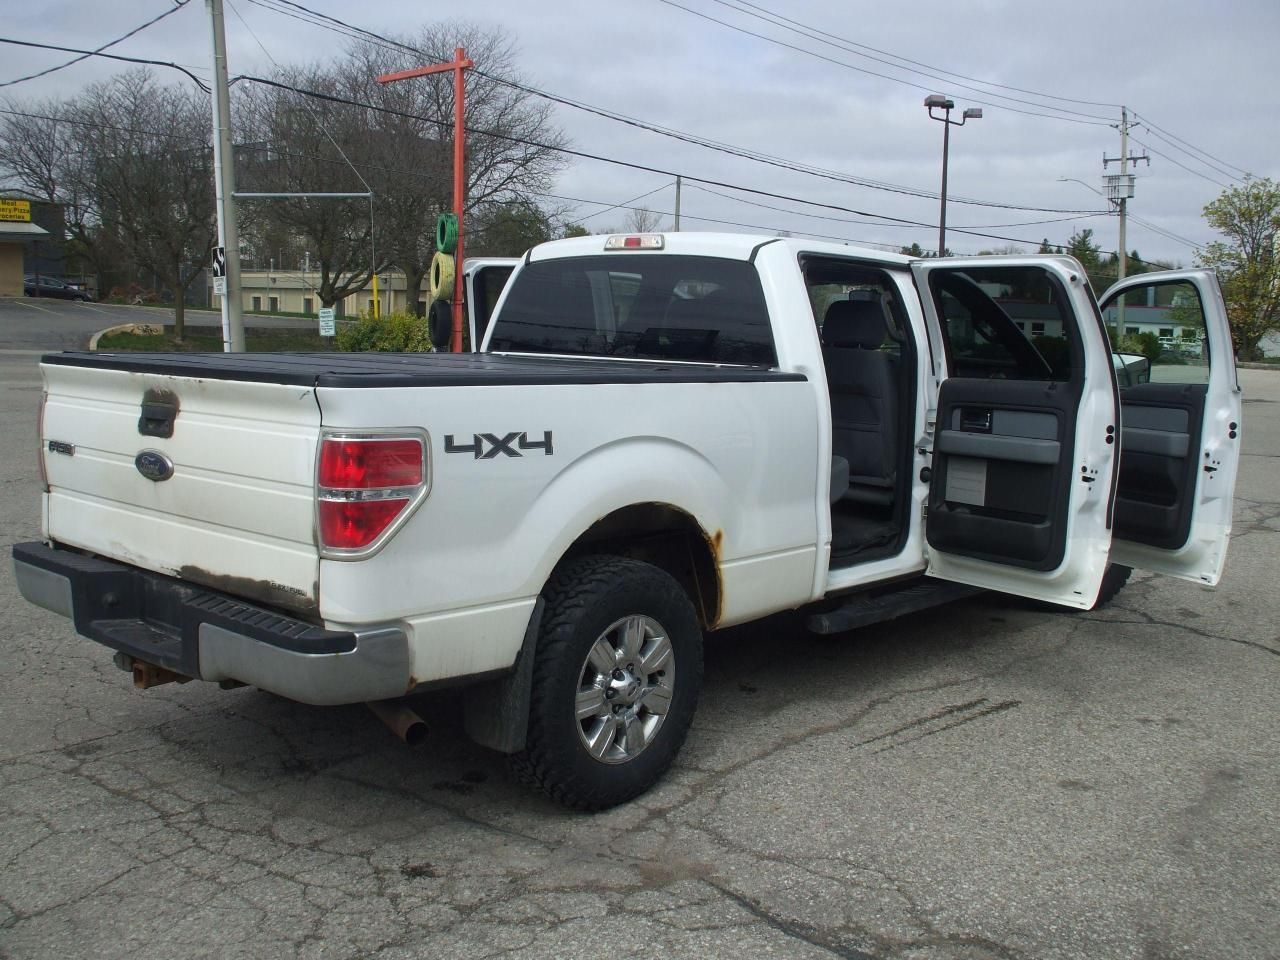 2014 Ford F-150 XLT,4WD,SuperCrew,Tinted,Bluetooth,SOLD AS IS,,,